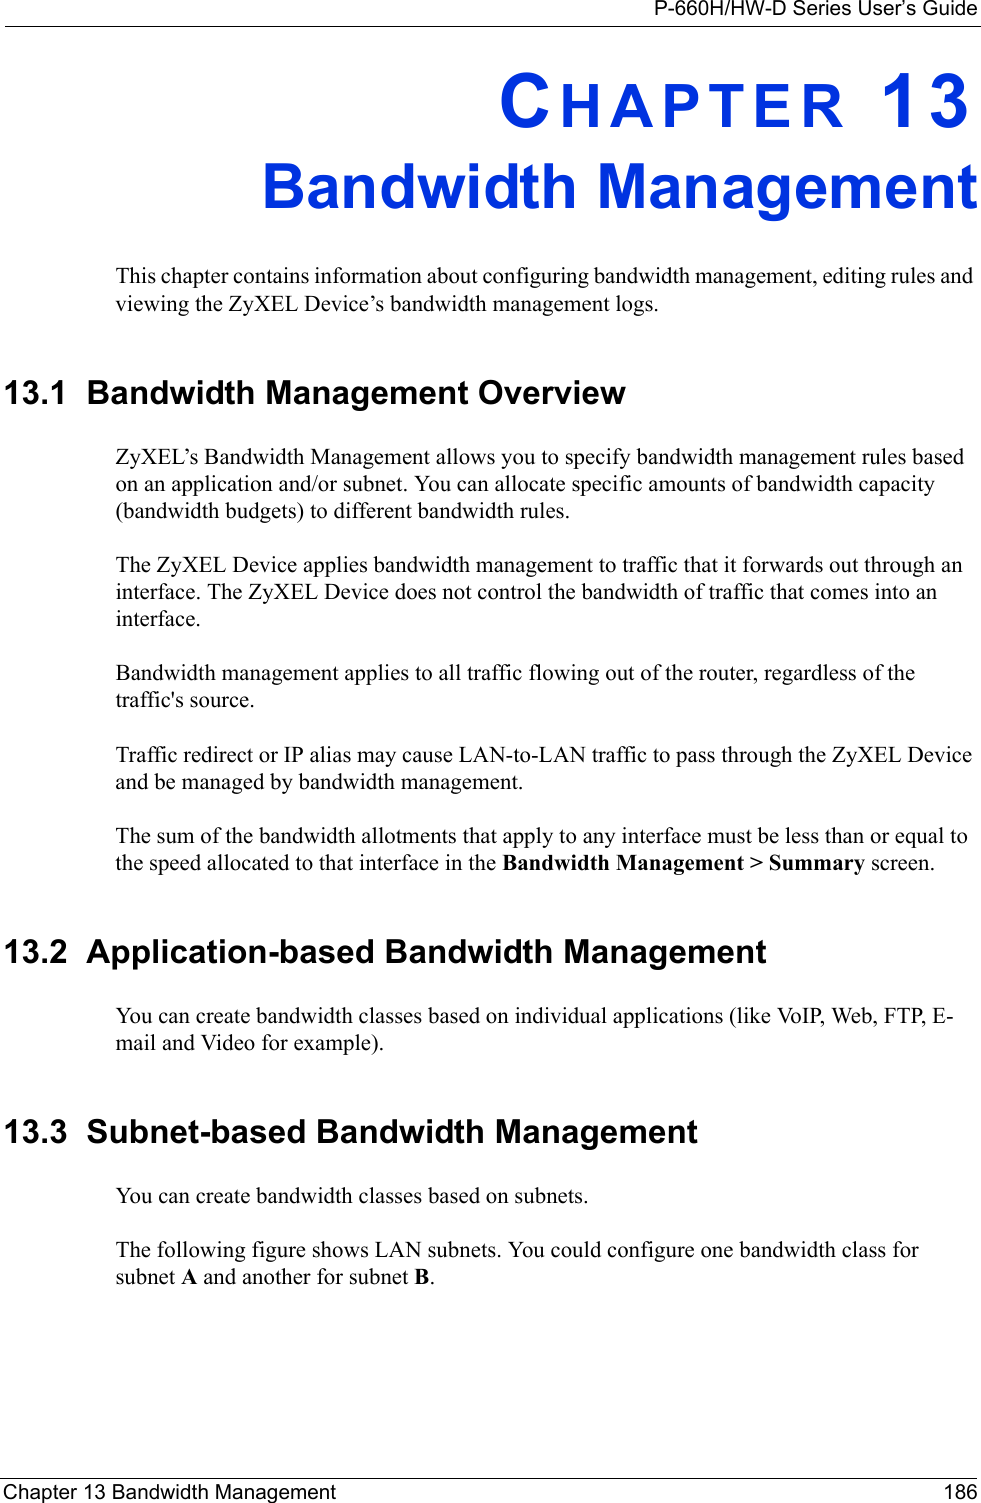 P-660H/HW-D Series User’s GuideChapter 13 Bandwidth Management 186CHAPTER 13Bandwidth ManagementThis chapter contains information about configuring bandwidth management, editing rules and viewing the ZyXEL Device’s bandwidth management logs.13.1  Bandwidth Management Overview ZyXEL’s Bandwidth Management allows you to specify bandwidth management rules based on an application and/or subnet. You can allocate specific amounts of bandwidth capacity (bandwidth budgets) to different bandwidth rules. The ZyXEL Device applies bandwidth management to traffic that it forwards out through an interface. The ZyXEL Device does not control the bandwidth of traffic that comes into an interface.Bandwidth management applies to all traffic flowing out of the router, regardless of the traffic&apos;s source.Traffic redirect or IP alias may cause LAN-to-LAN traffic to pass through the ZyXEL Device and be managed by bandwidth management. The sum of the bandwidth allotments that apply to any interface must be less than or equal to the speed allocated to that interface in the Bandwidth Management &gt; Summary screen.13.2  Application-based Bandwidth ManagementYou can create bandwidth classes based on individual applications (like VoIP, Web, FTP, E-mail and Video for example).13.3  Subnet-based Bandwidth ManagementYou can create bandwidth classes based on subnets.The following figure shows LAN subnets. You could configure one bandwidth class for subnet A and another for subnet B. 